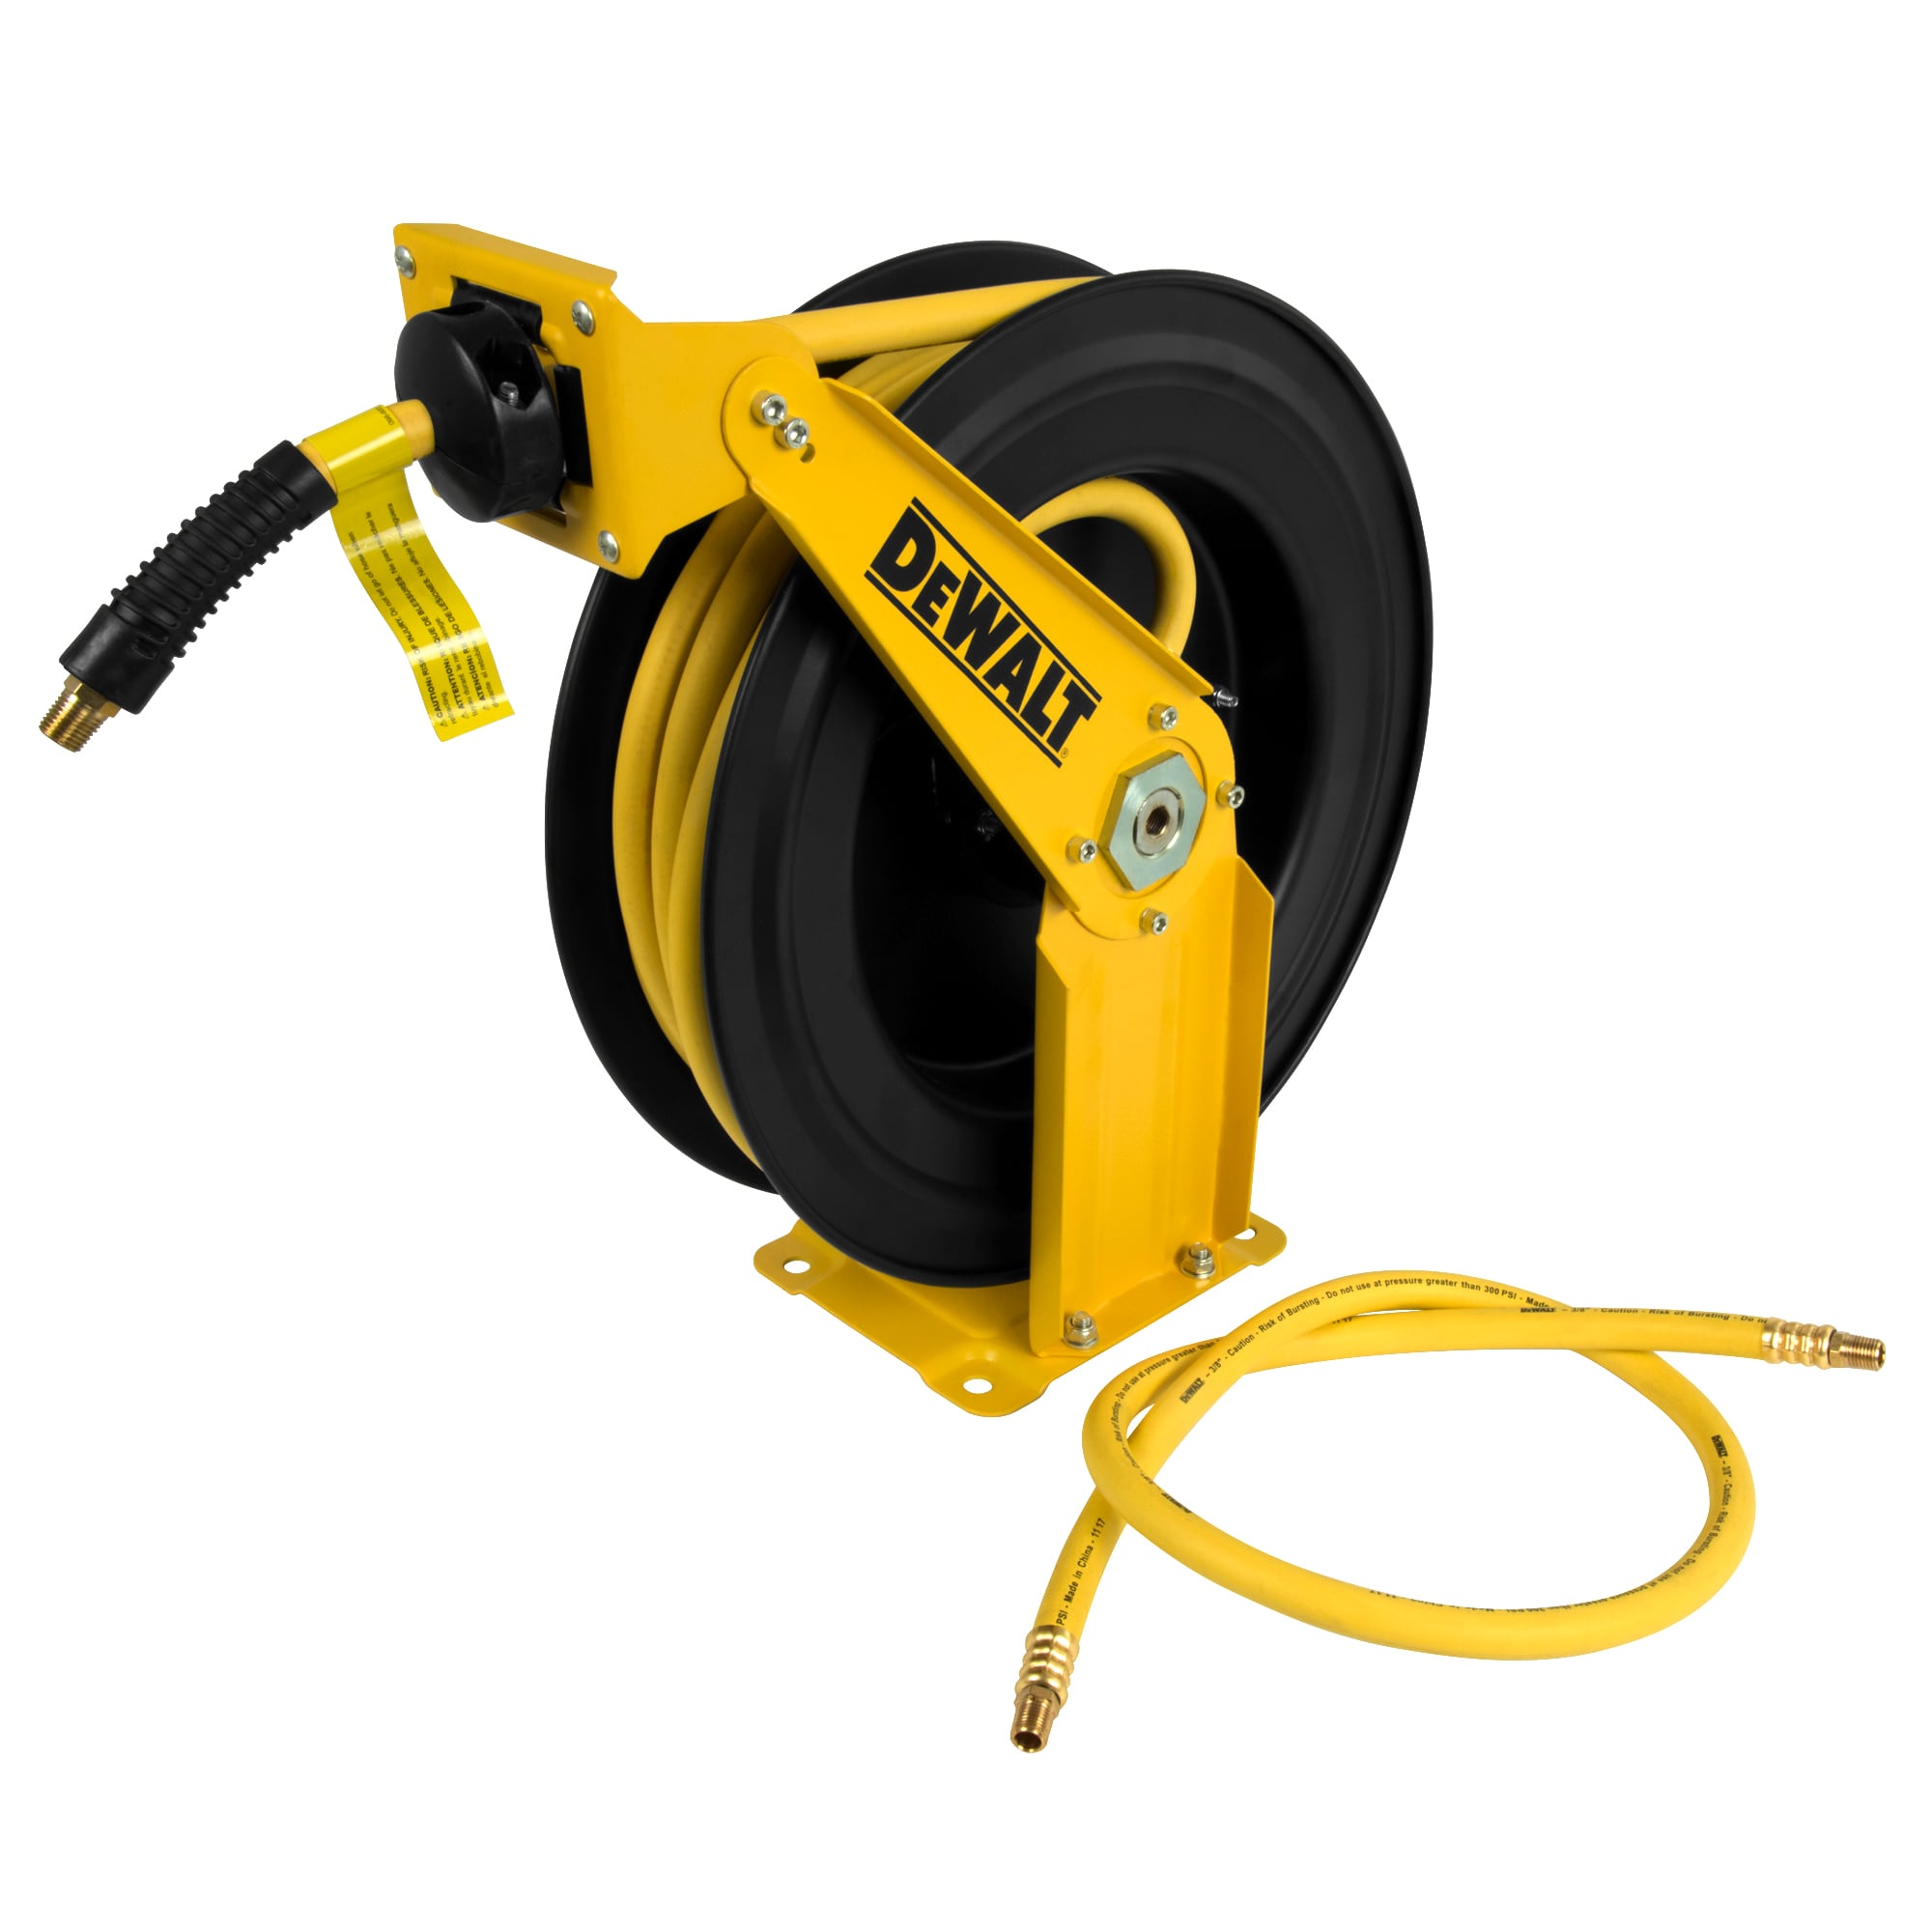 Goodyear Air Compressor Hose Reel Enclosed Retractable 3/8 in. x 50 ft. Hybrid Polymer Hose, Max. 300PSI